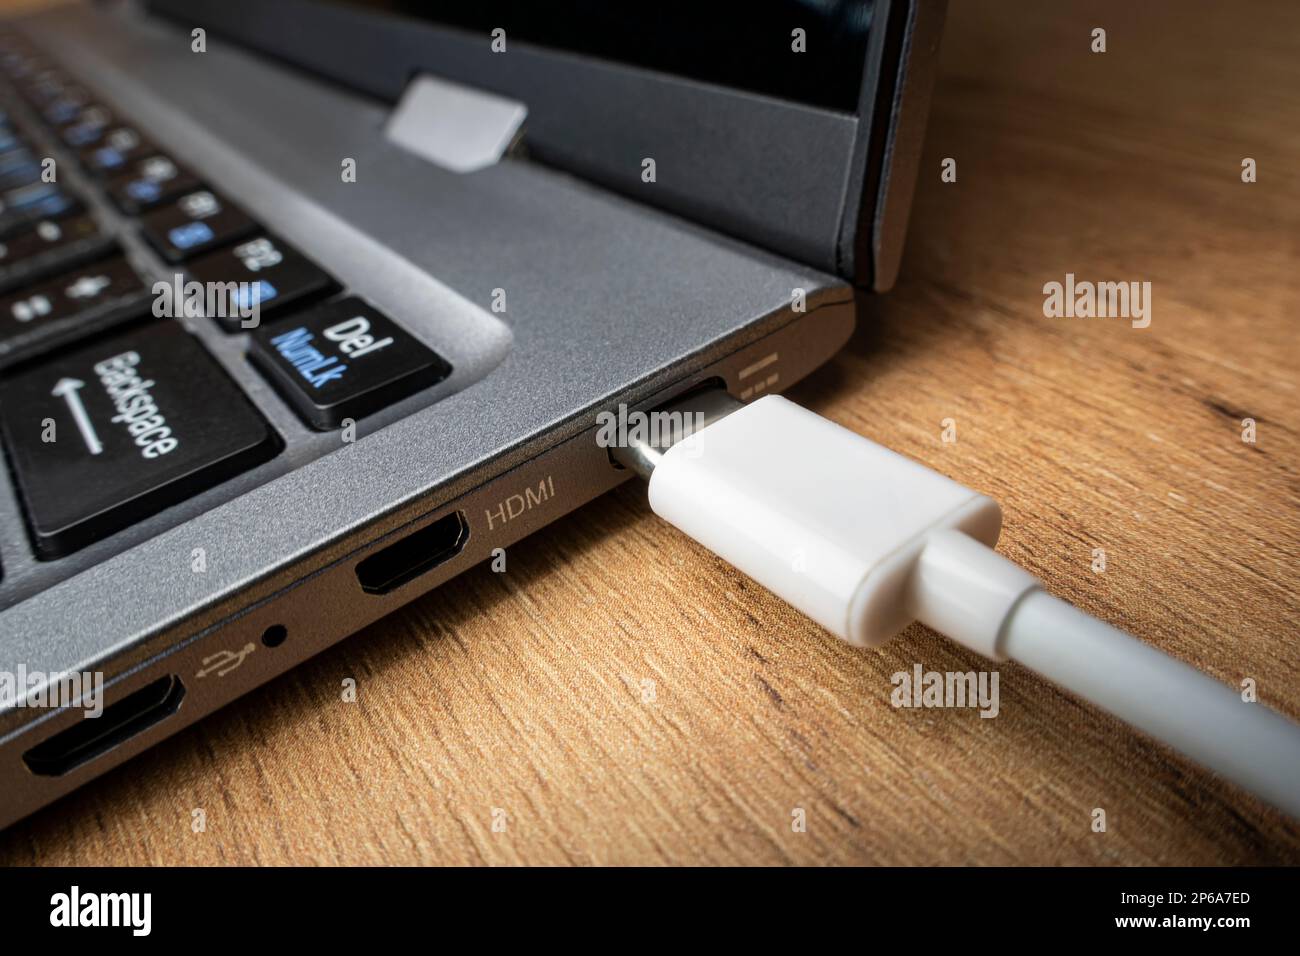 Cable USB adapter under the Type-C connector is installed in the laptop against the background of a wooden table Stock Photo